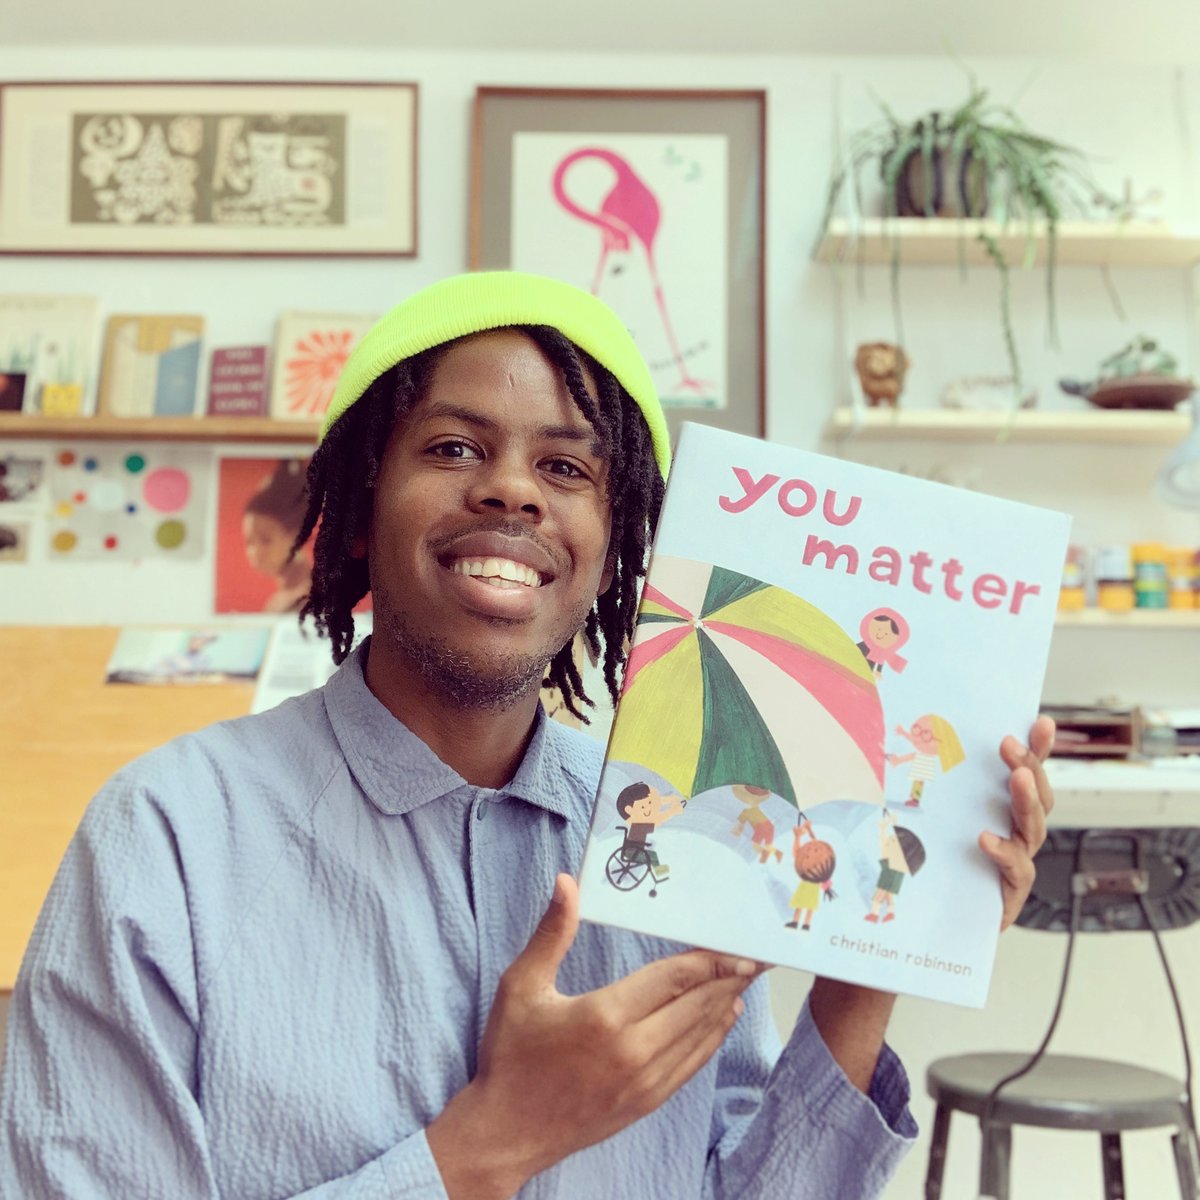 Barnes Noble On Twitter Caldecott And Coretta Scott King Honoree Christian Robinson Theartoffunnews Reads His Impactful Picture Book You Matter For Virtual Bnstorytime Https T Co 3ooesru9uz Https T Co I7qurpqxqn For Activities And More